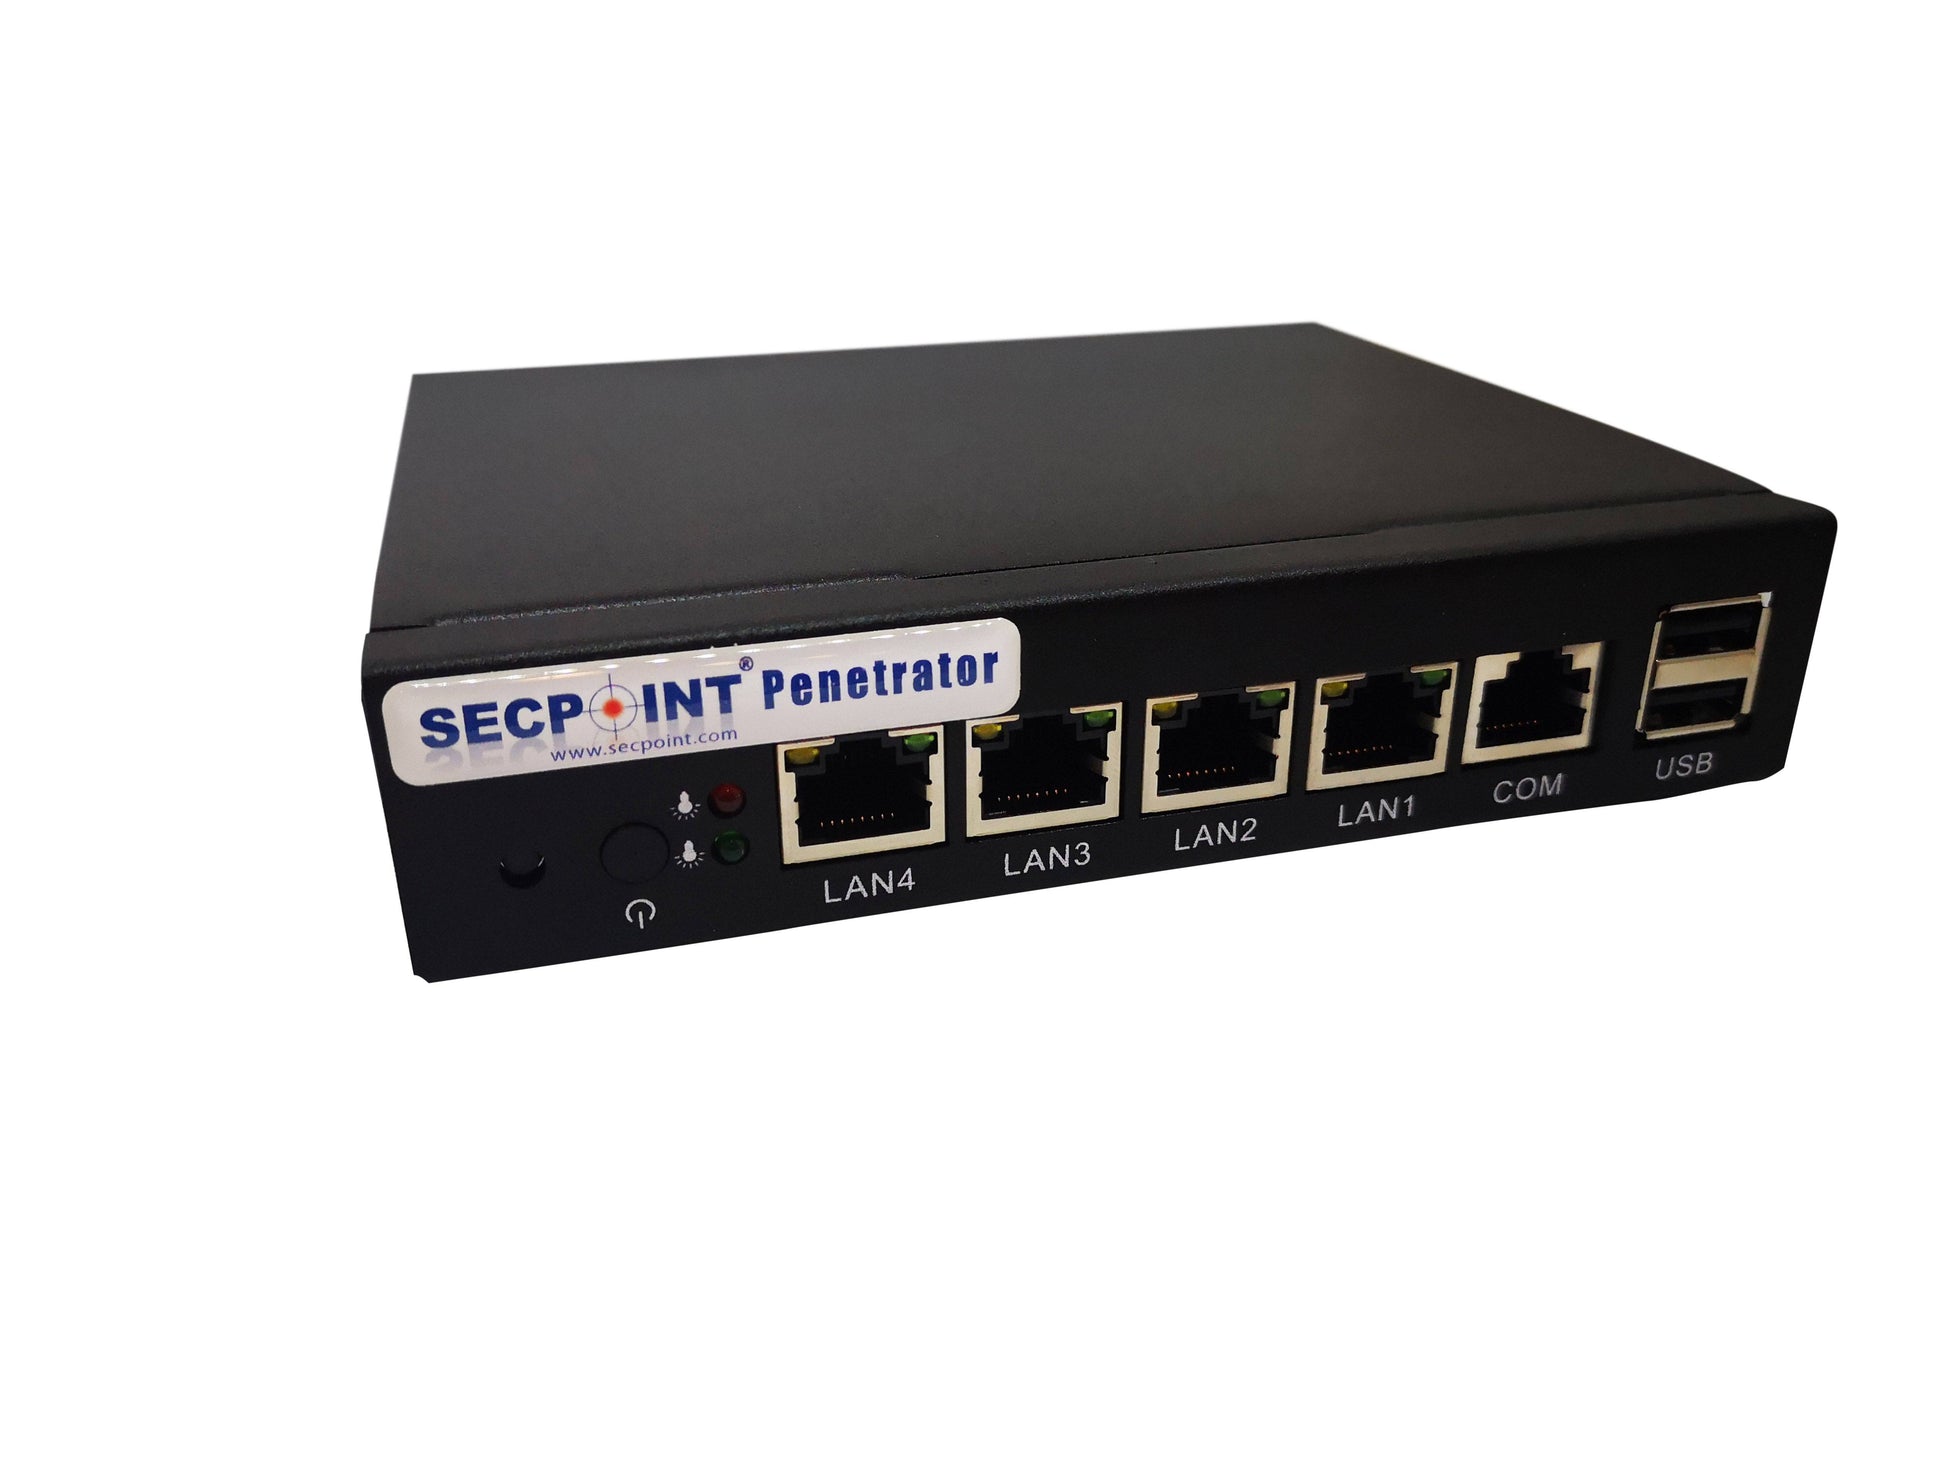 SecPoint Penetrator S9 - 64 IP Concurrent Scan License Vuln Scanning Appliance SFF (1 Year License) - SecPoint